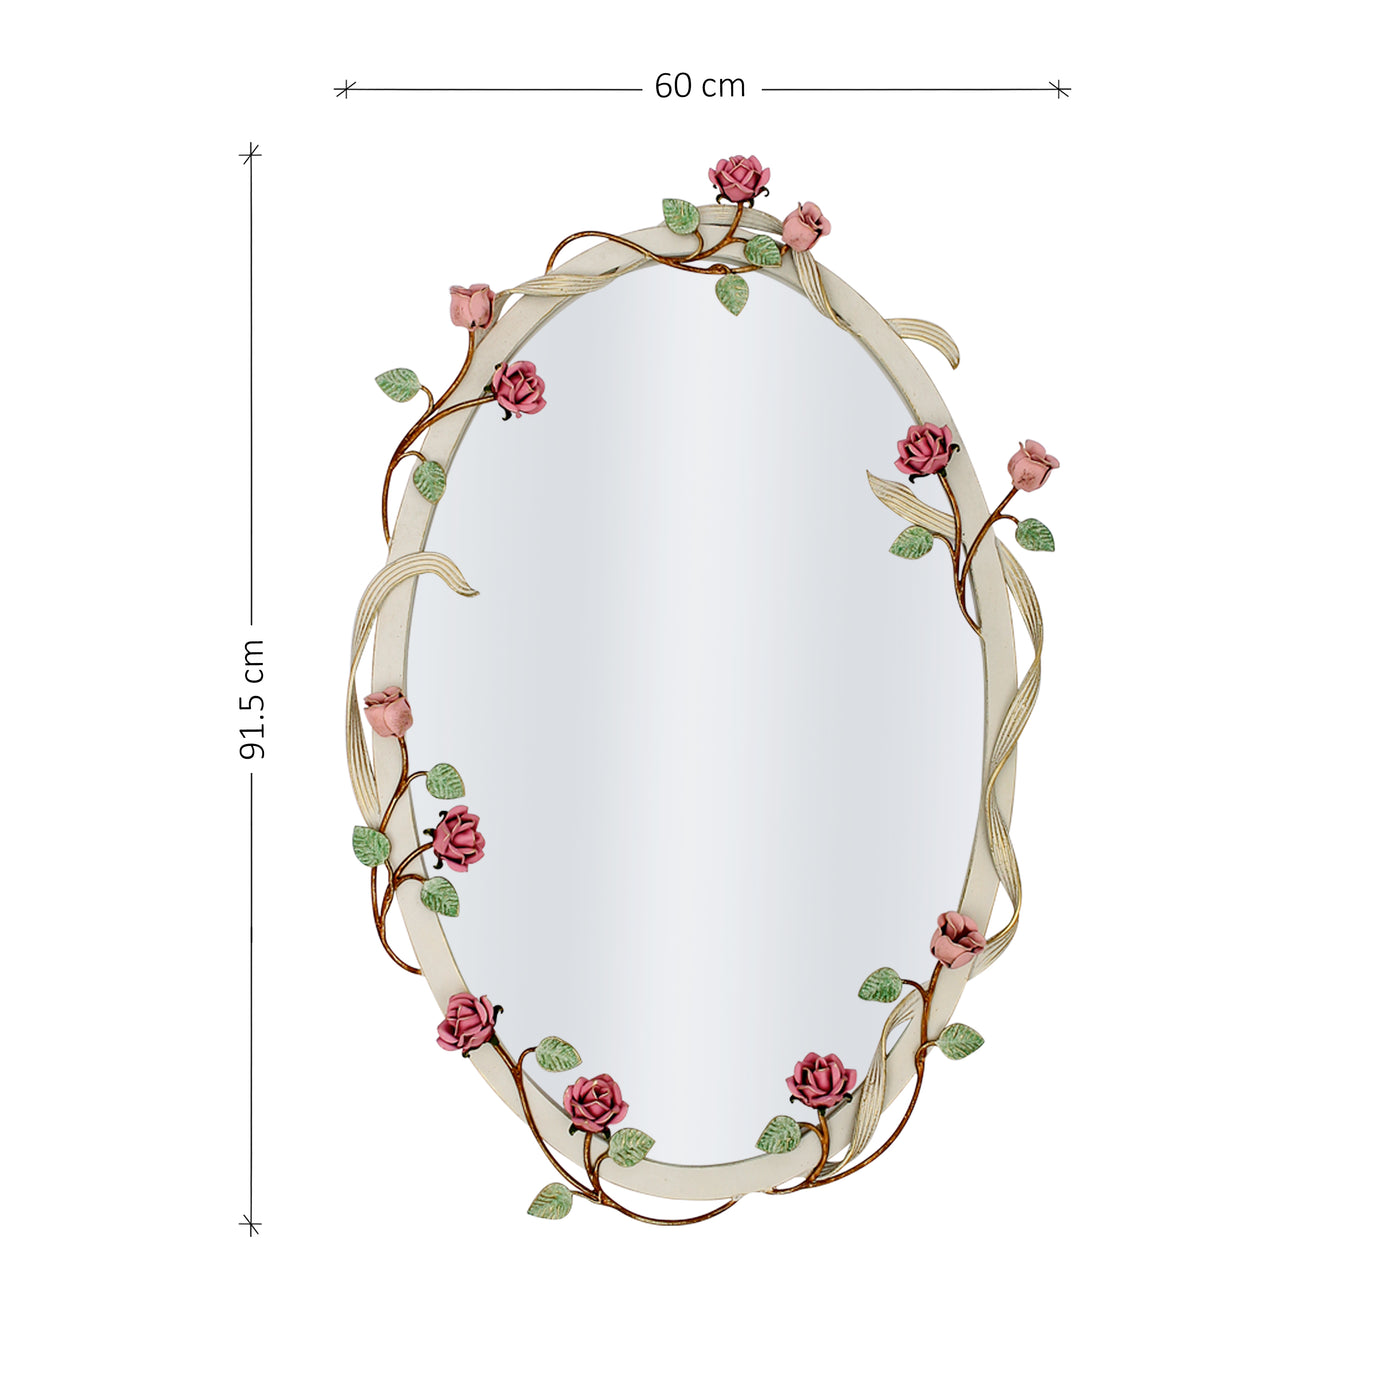 An oval shaped mirror with a wreath of pink roses and green leaves wrapped along its border; with annotated dimensions